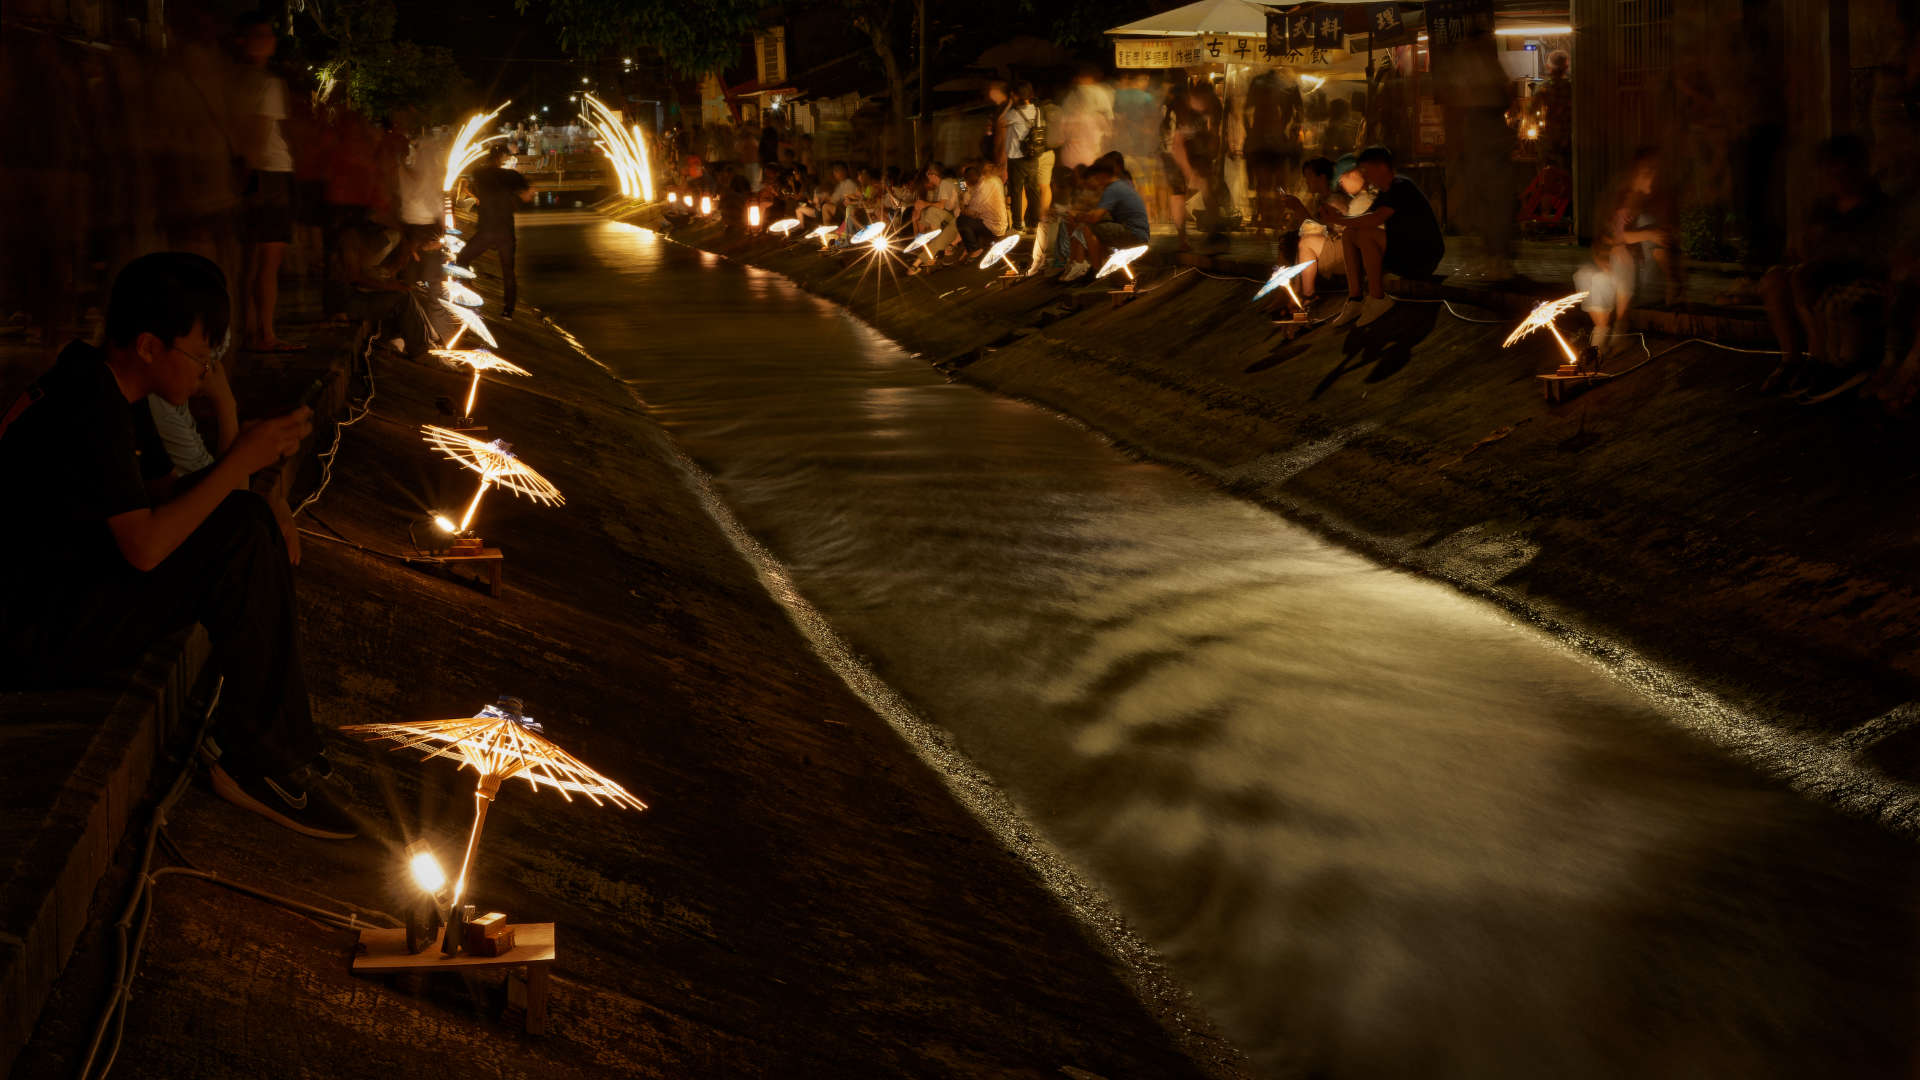 Small wooden umbrellas, illuminated from below, alongside a canal with crowds of people sitting on either side. A few people are walking in the knee-deep water.